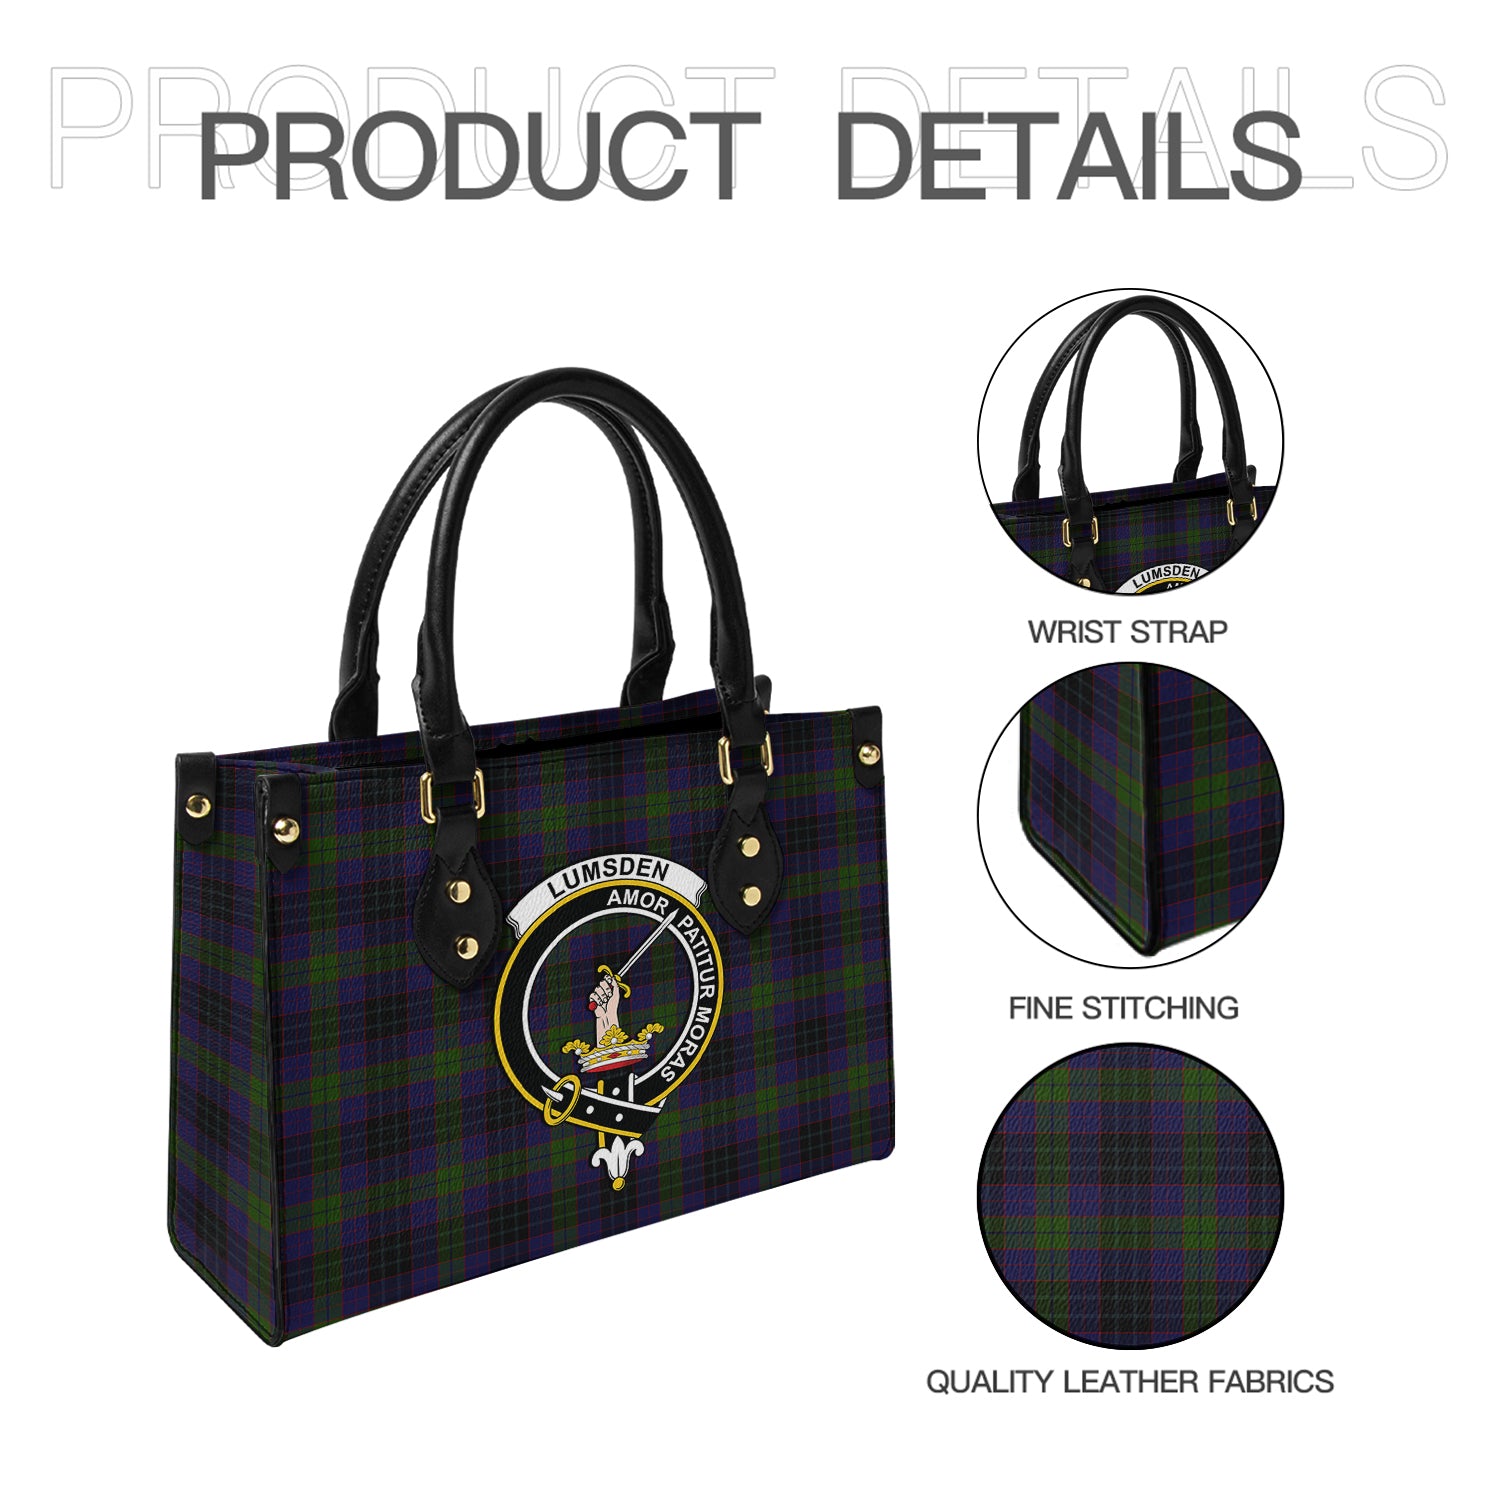 lumsden-hunting-tartan-leather-bag-with-family-crest